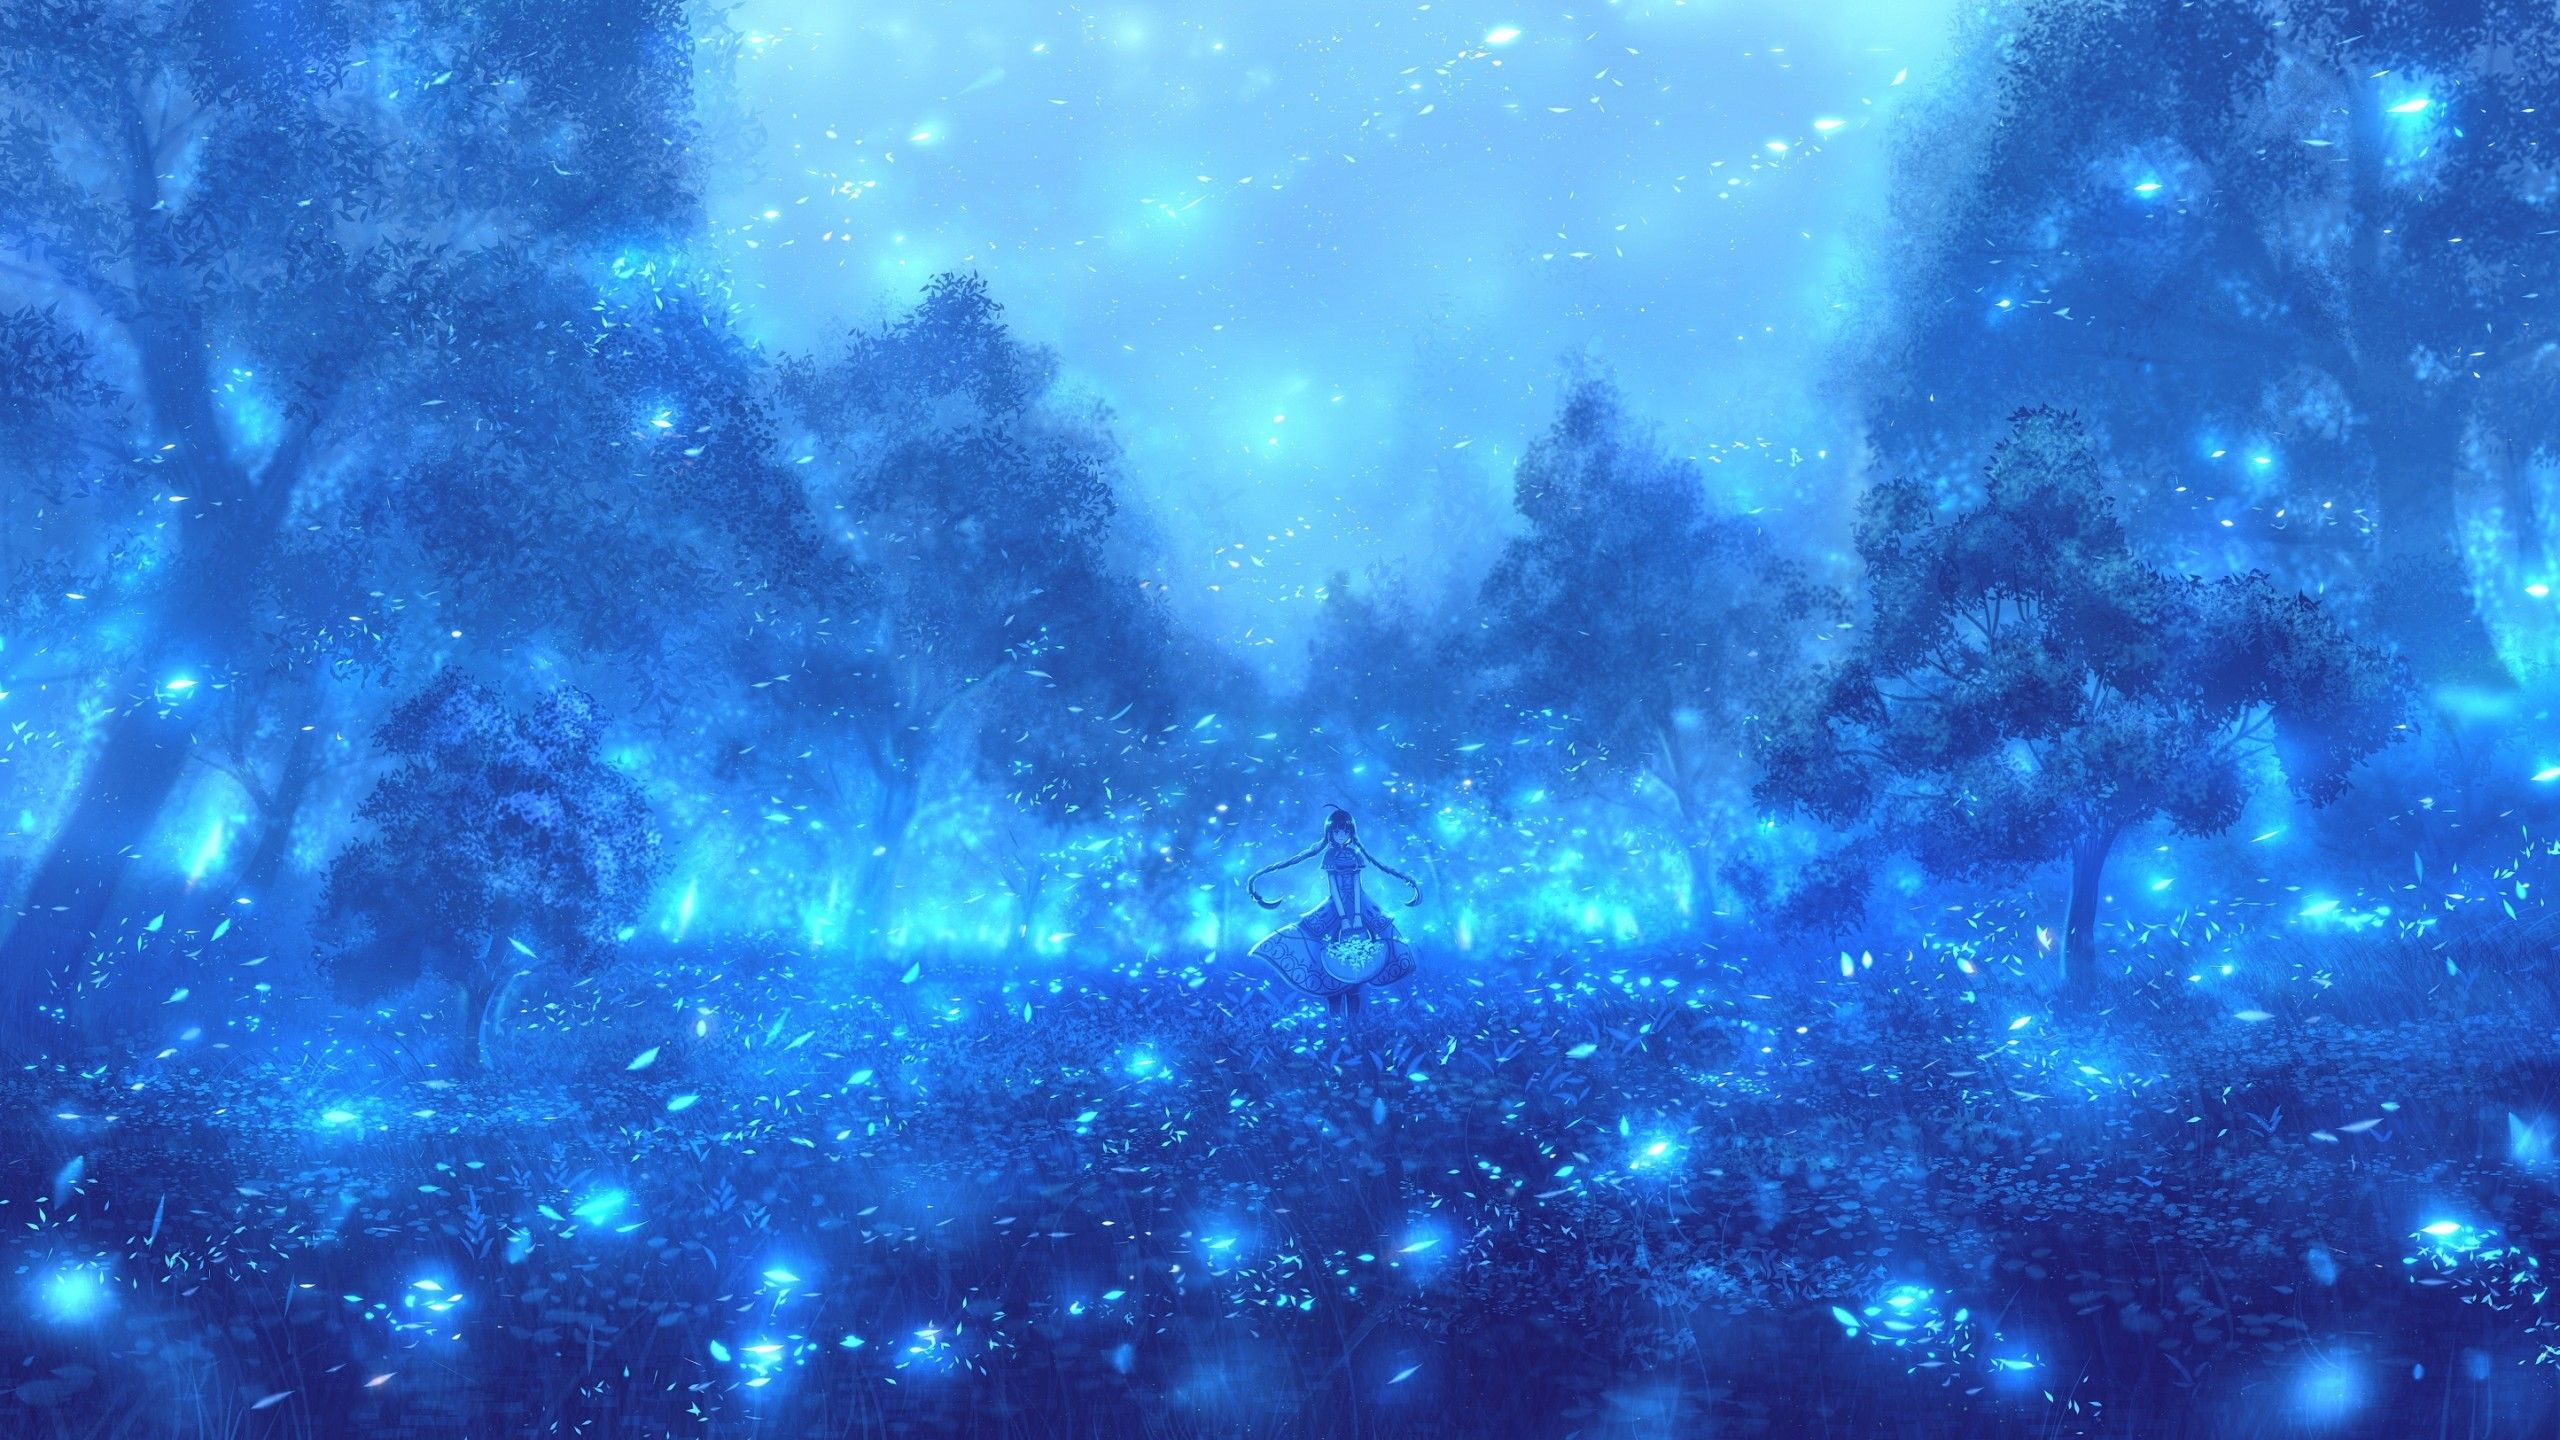 Download 2560x1440 Anime Landscape, Scenery, Anime Gir, Dress, Blue Particles Wallpaper for iMac 27 inch